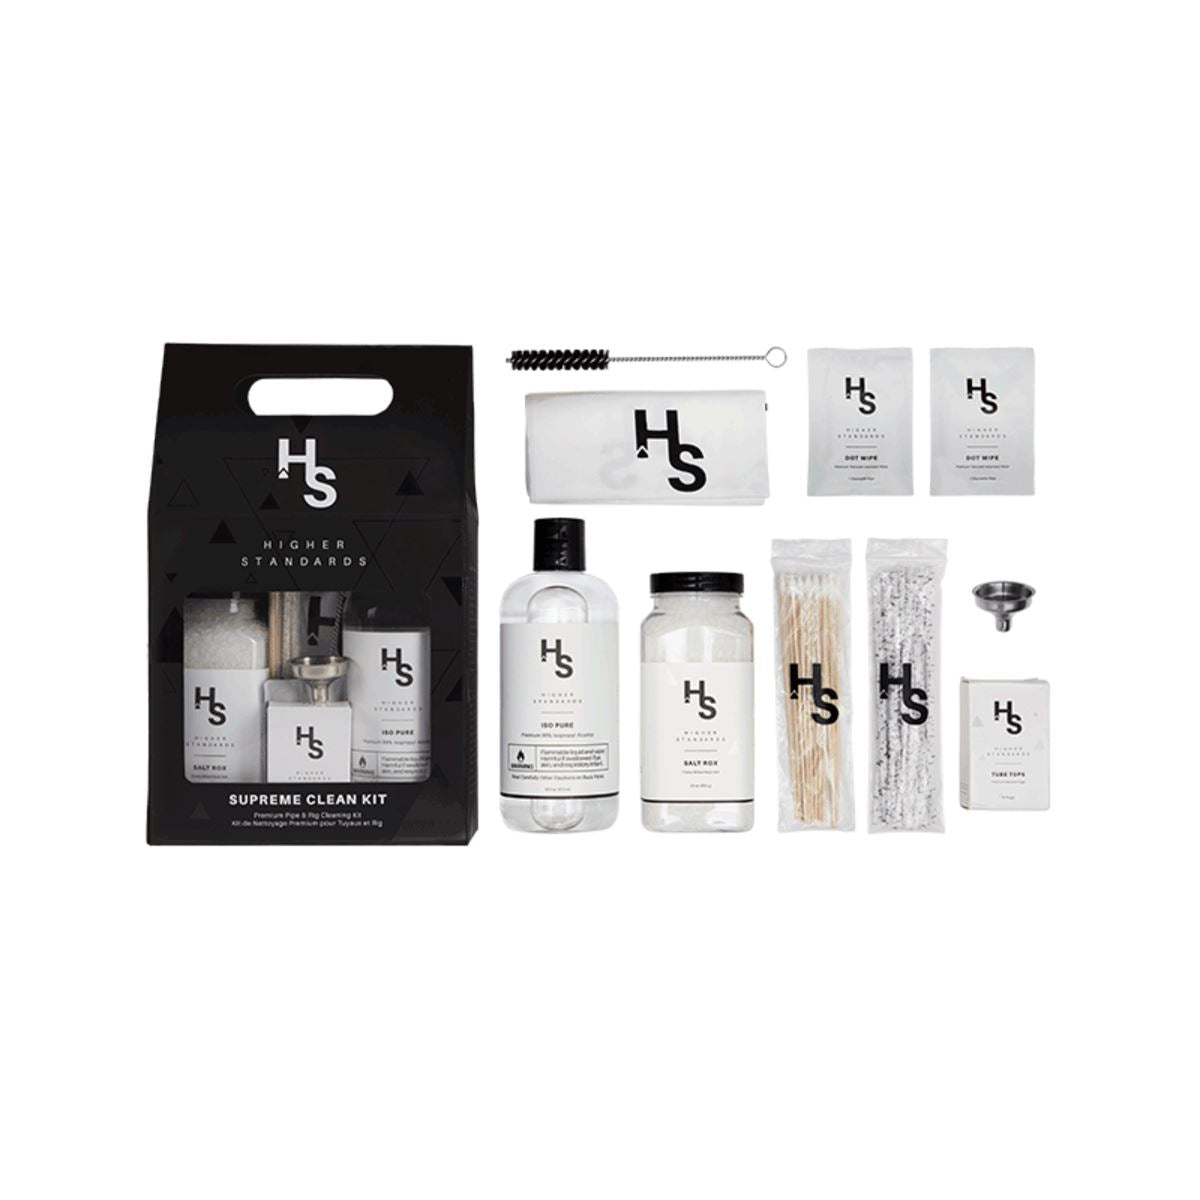 Higher Standards Supreme Clean Kit at Flower Power Packages